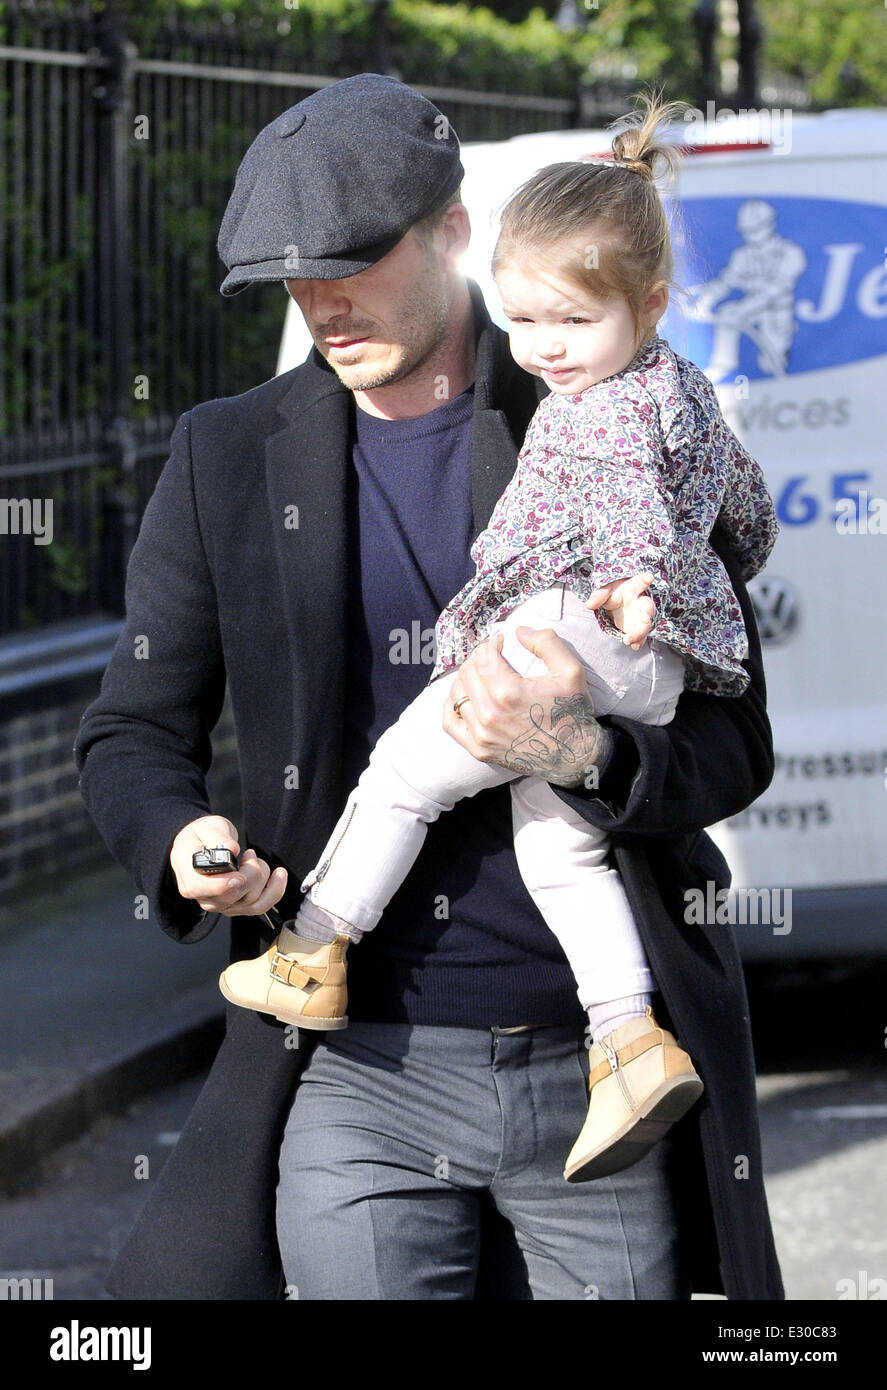 https://c8.alamy.com/comp/E30C83/david-beckham-and-his-daughter-harper-out-and-about-in-central-london-E30C83.jpg